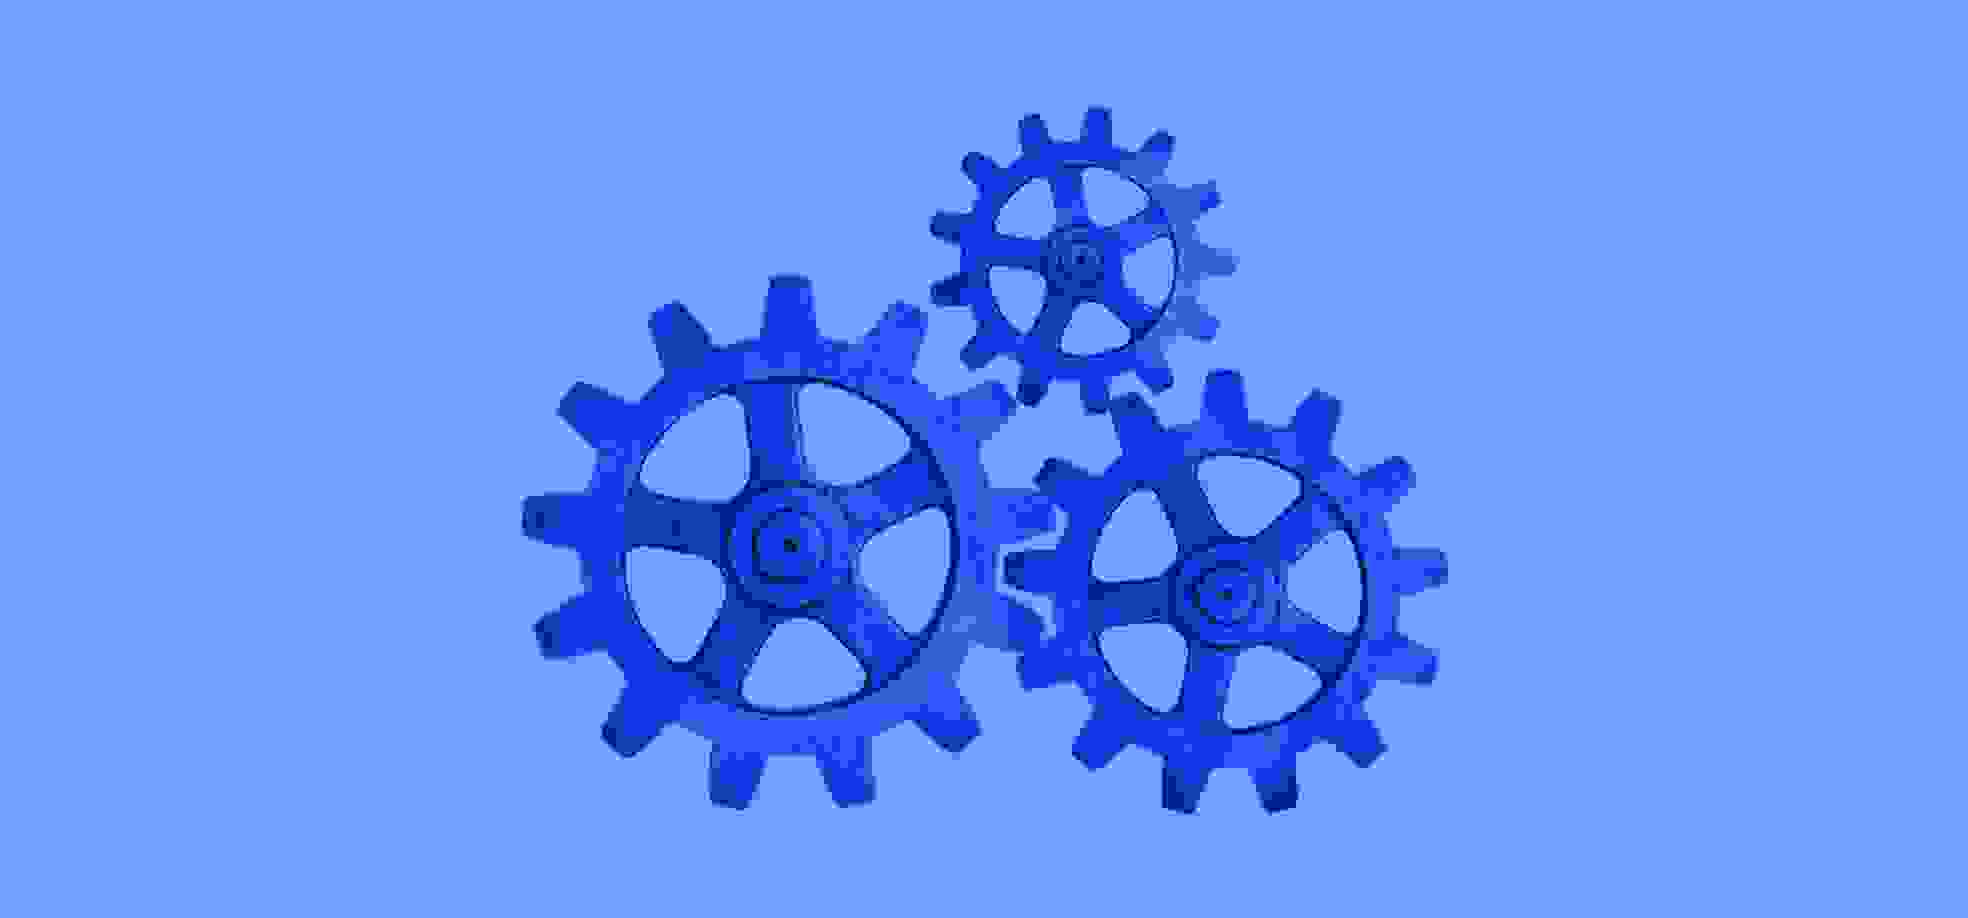 a blue gear icon on a blue background